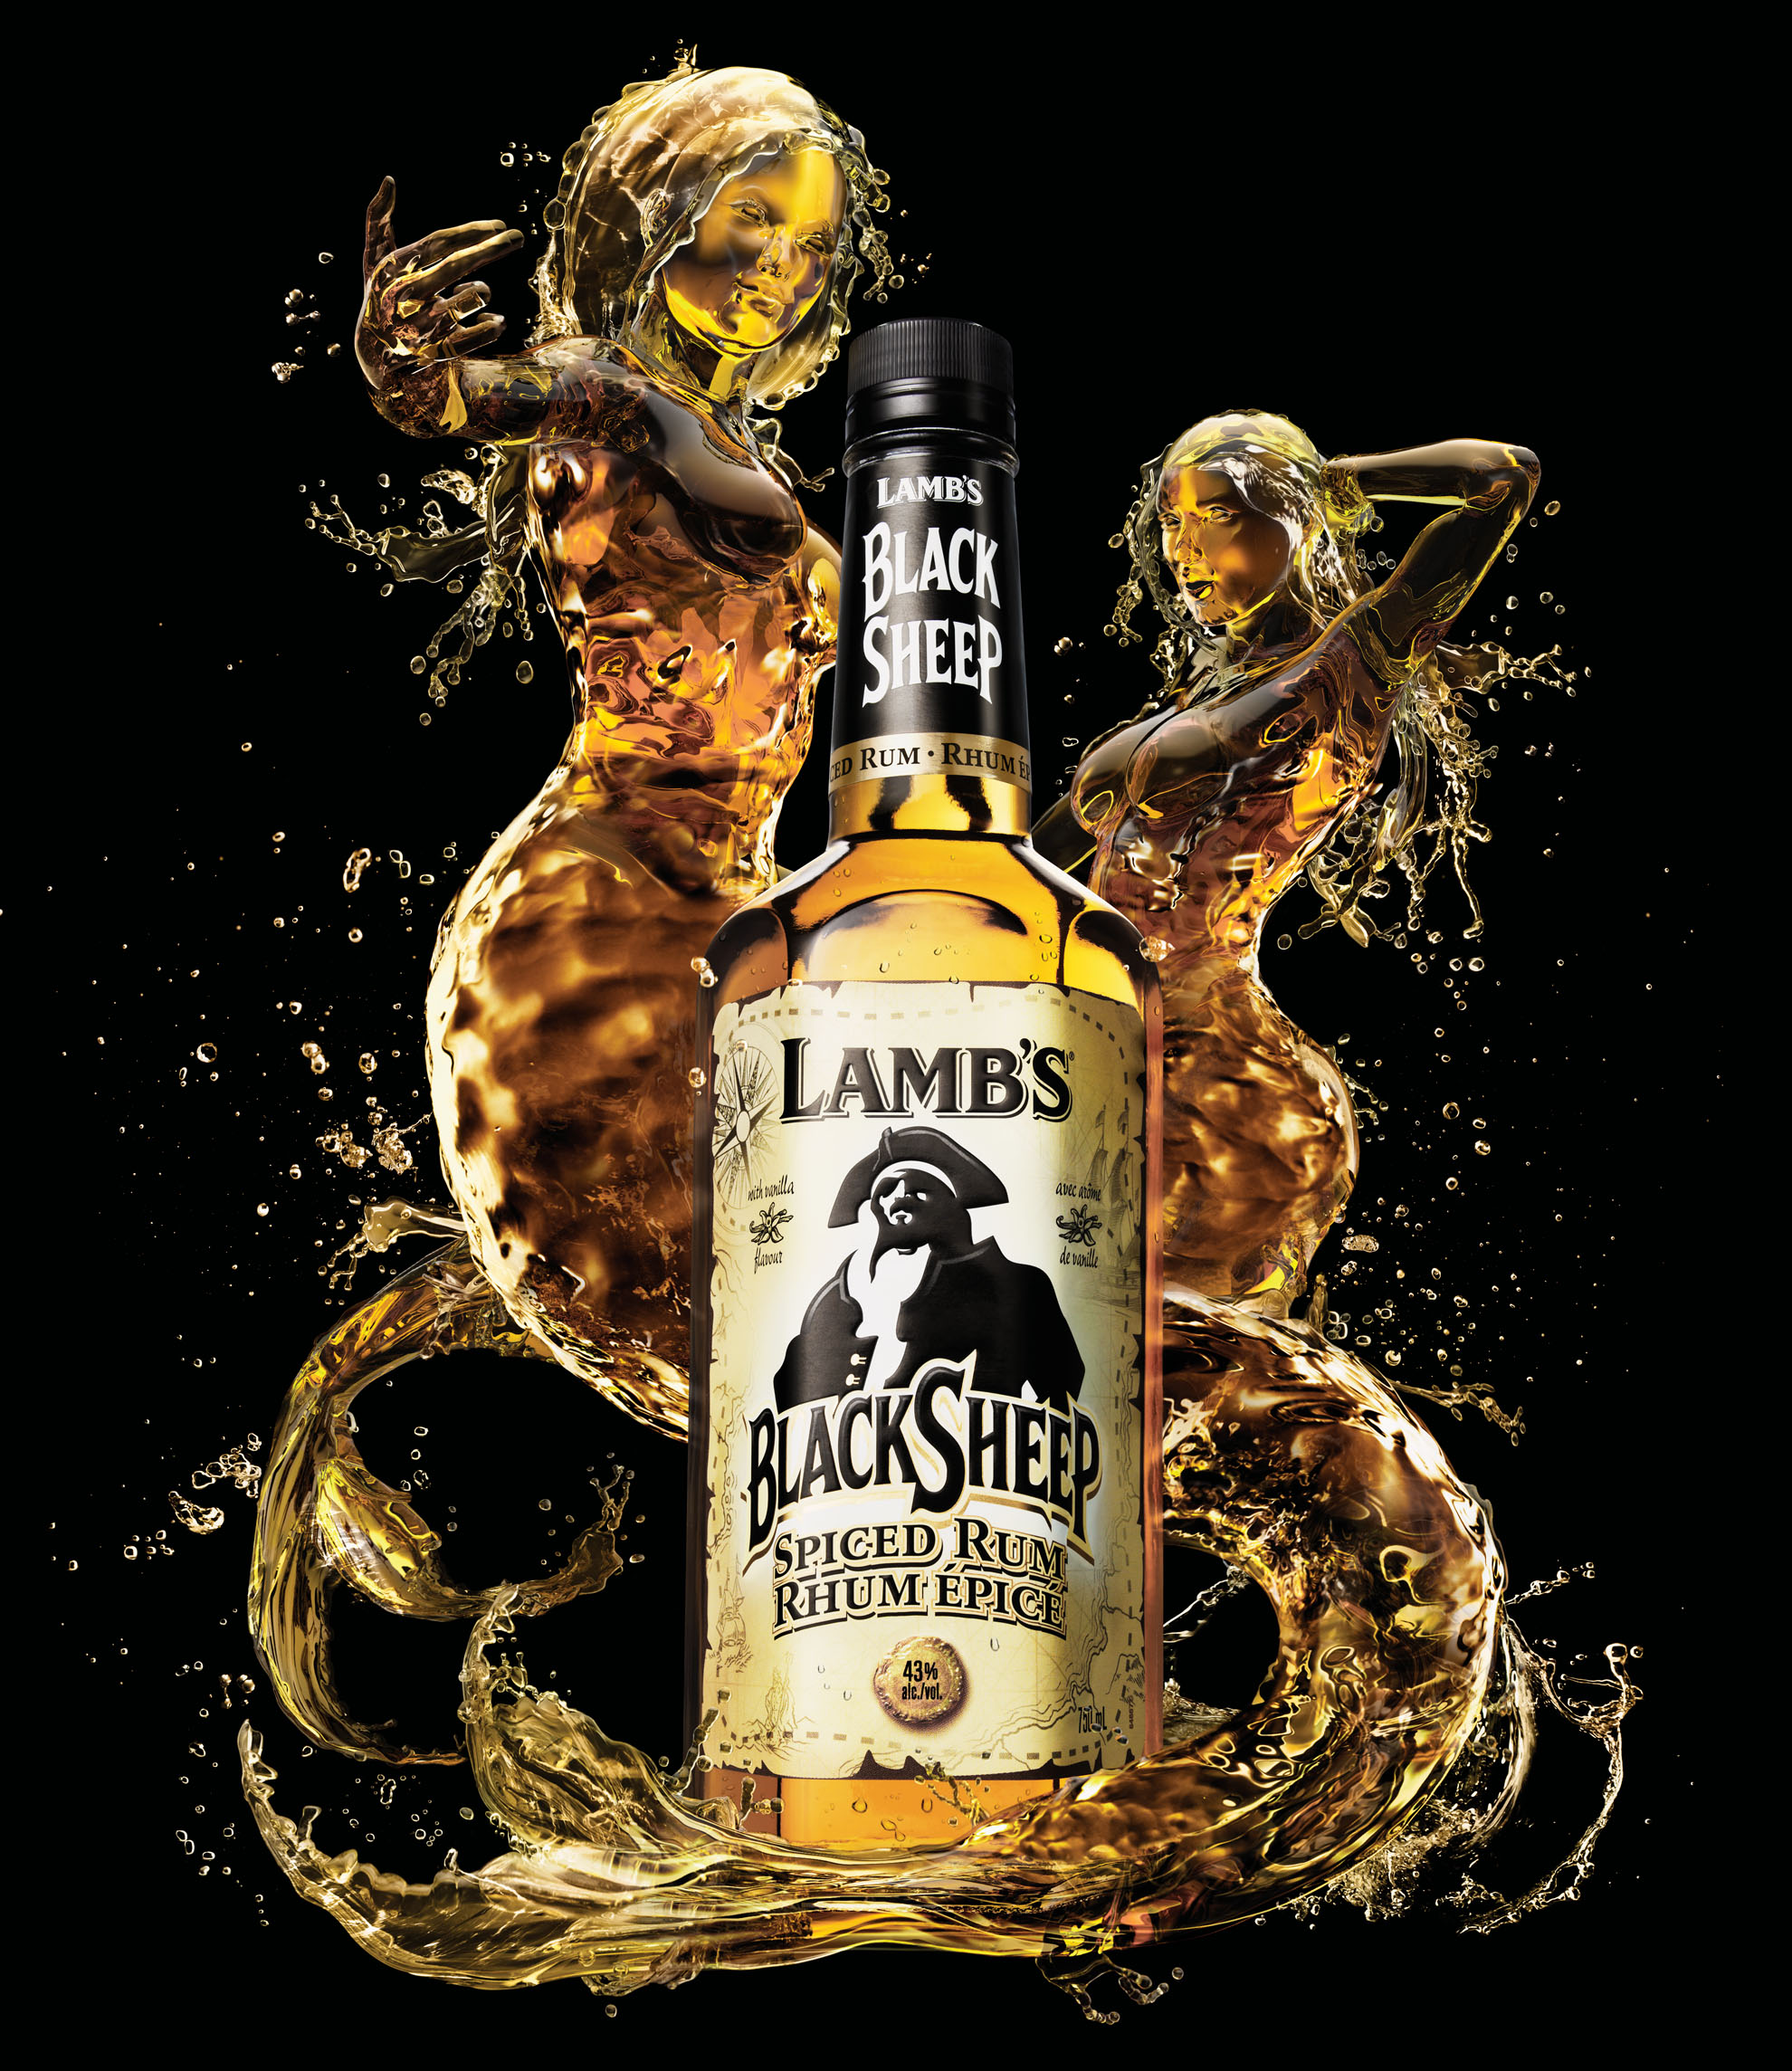  Agency • Smith Roberts  Client • Lamb's Rum  Art Director • Gerald Flach  Photographer • Philip Rostron  CGI and imaging • Brad Pickard    